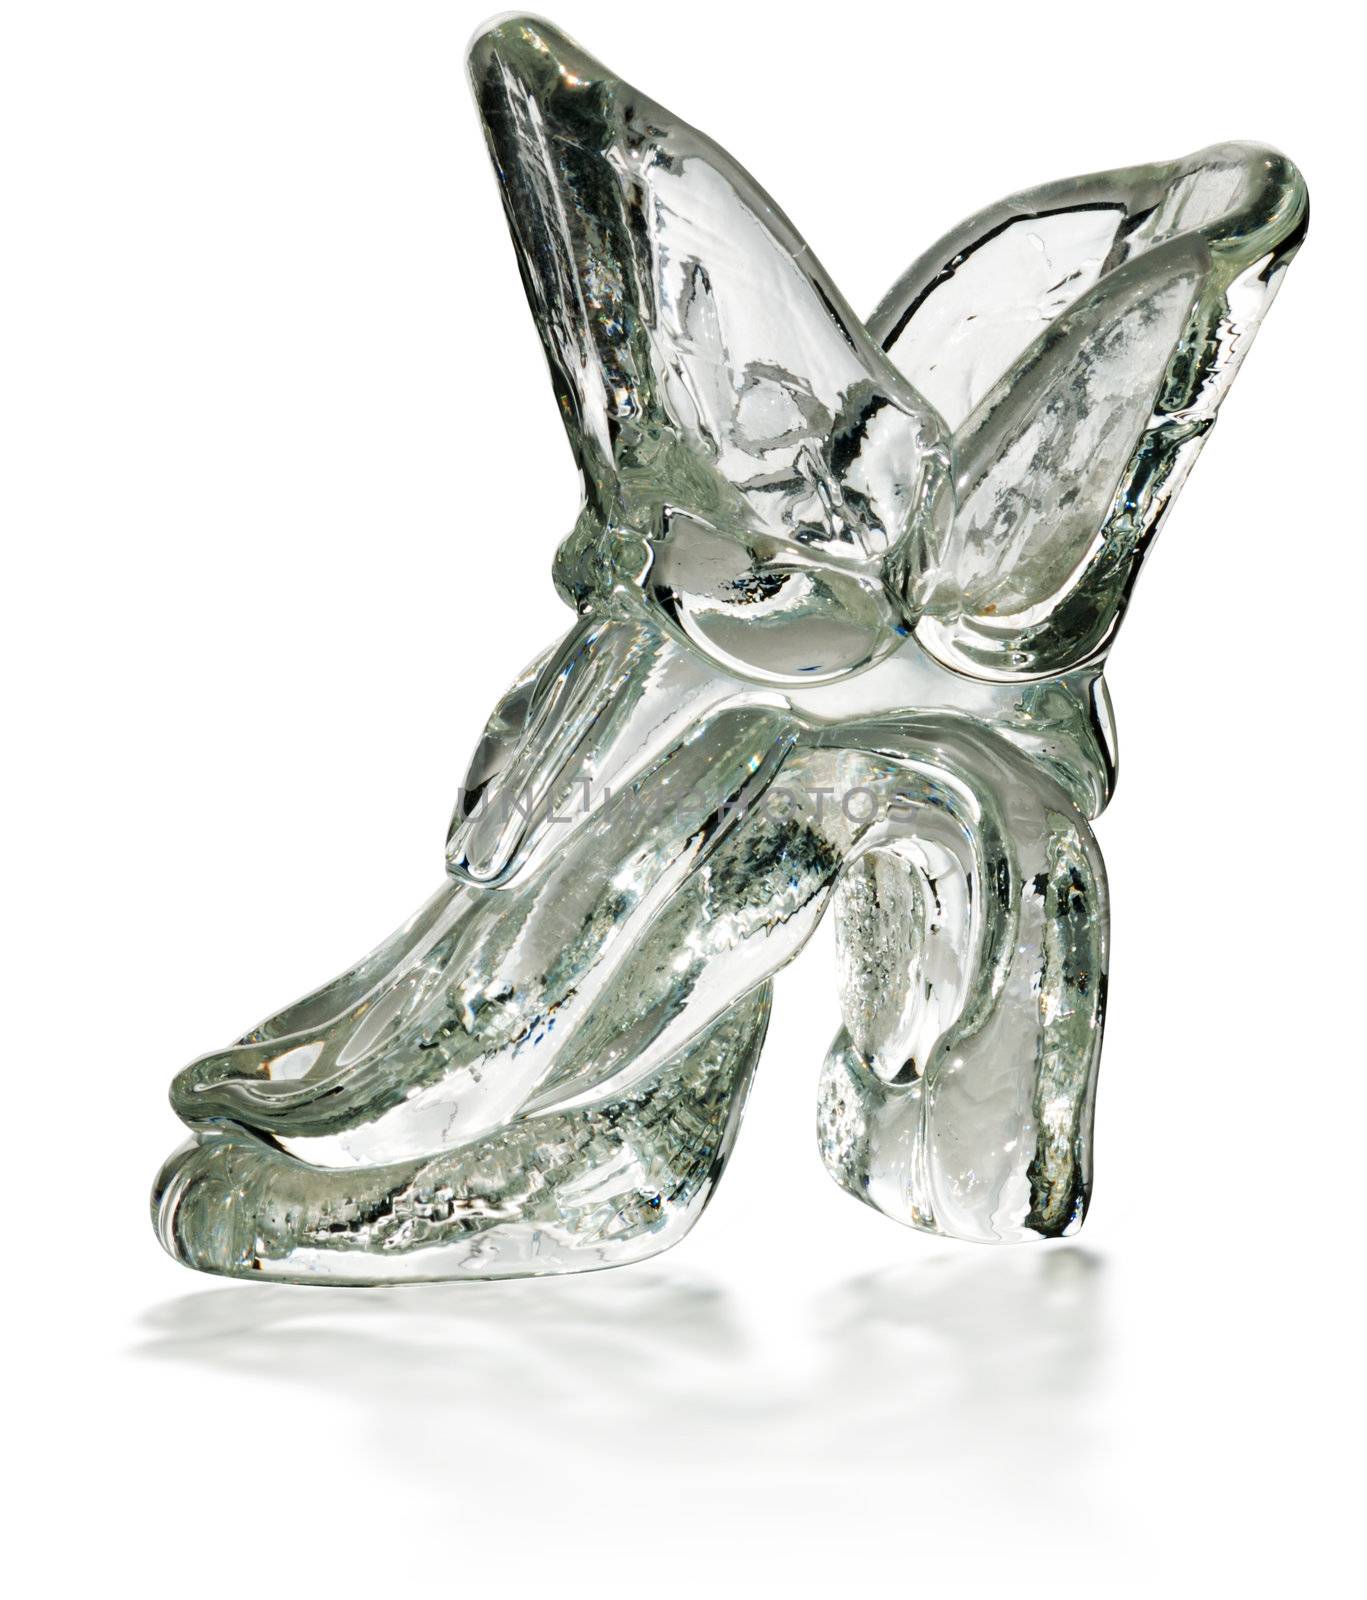 Crystal boot. A product from glass with reflection